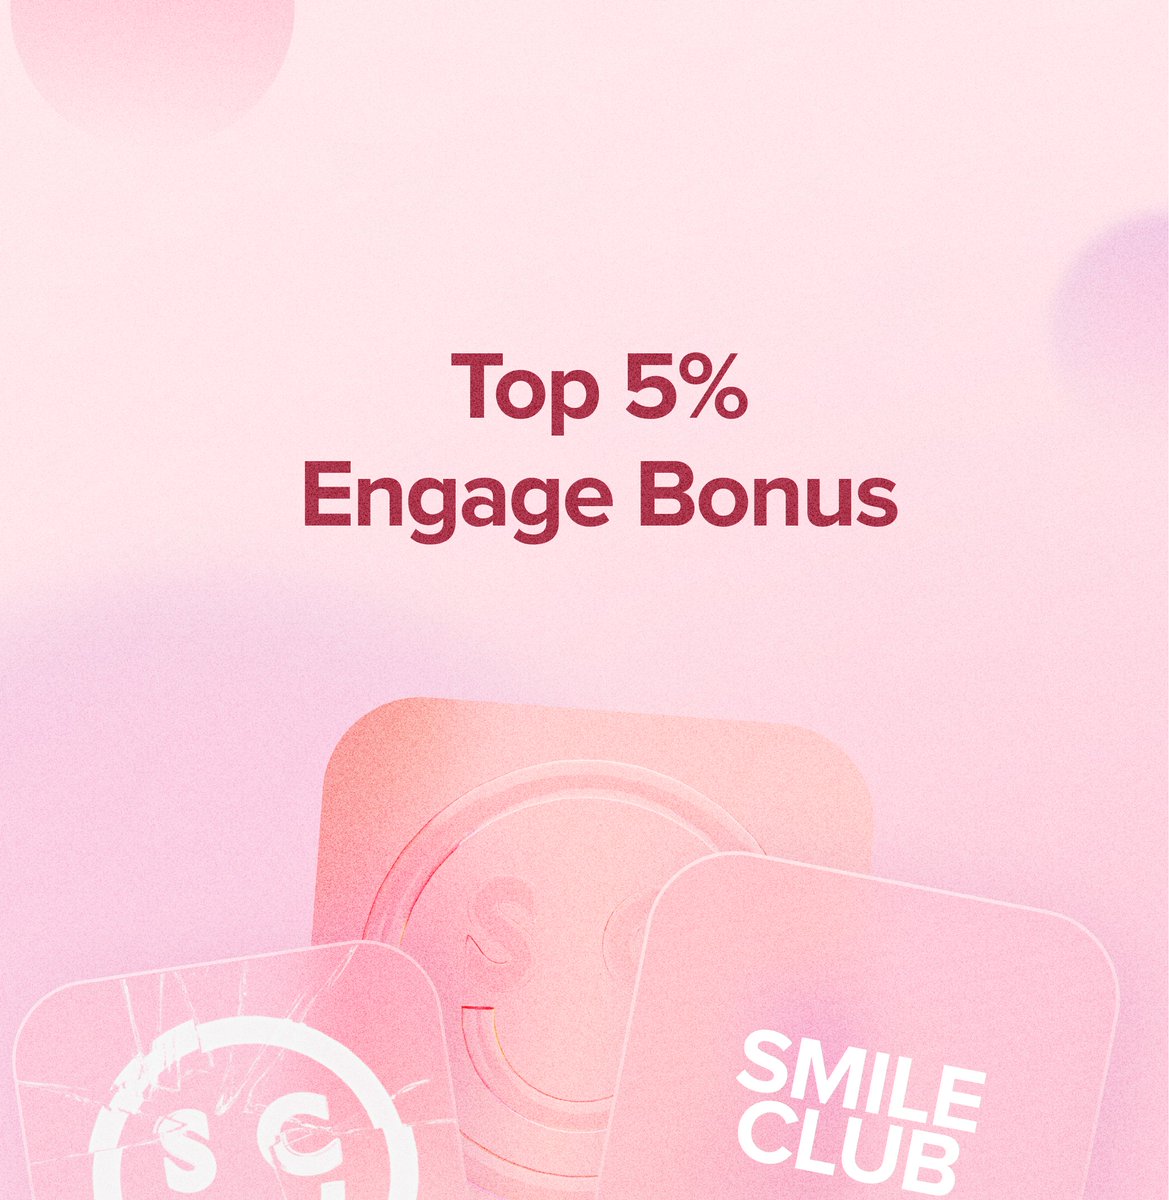 Have you been paying attention? On Friday in our Discord event, we announced that the top 5% of experience members (i.e., those completing quests, trivia, social challenges), will be receiving an XP bonus. Engage bonus ends Monday. bit.ly/4aYUTbc